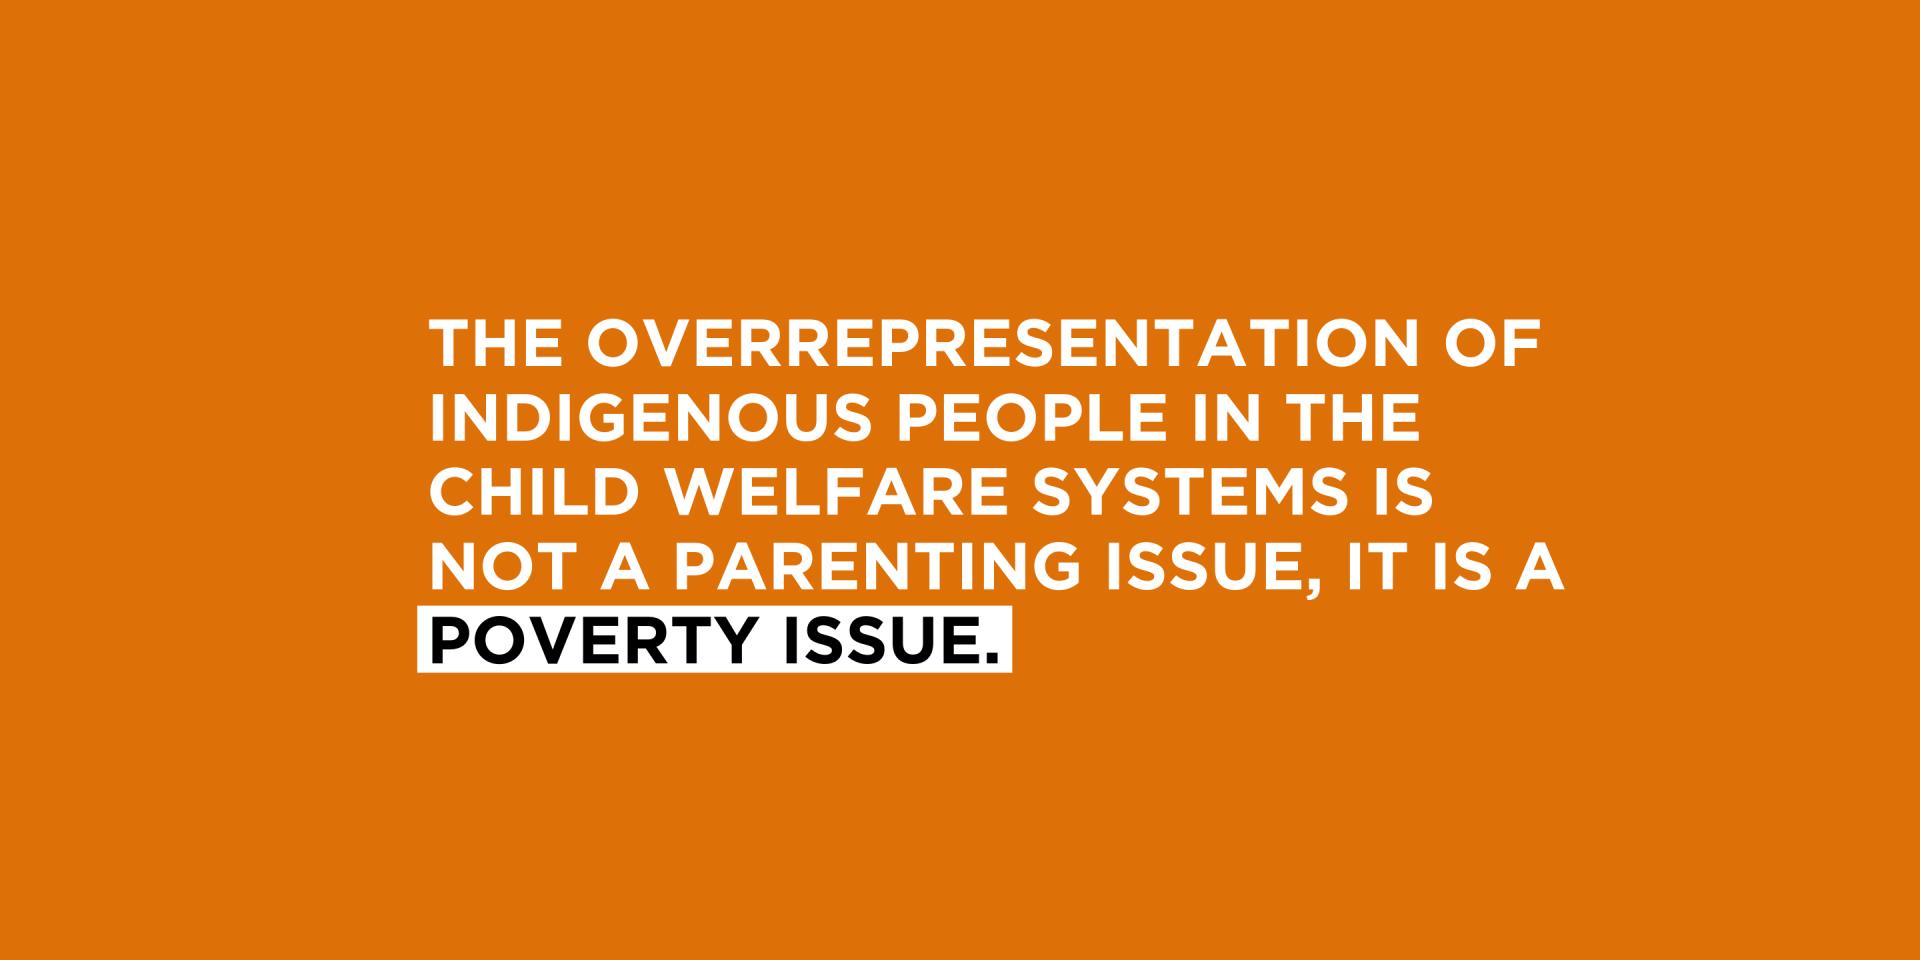 Text: The overrepresentation of Indigenous people in the child welfare systems is not a parenting issue, it is a poverty issue. 